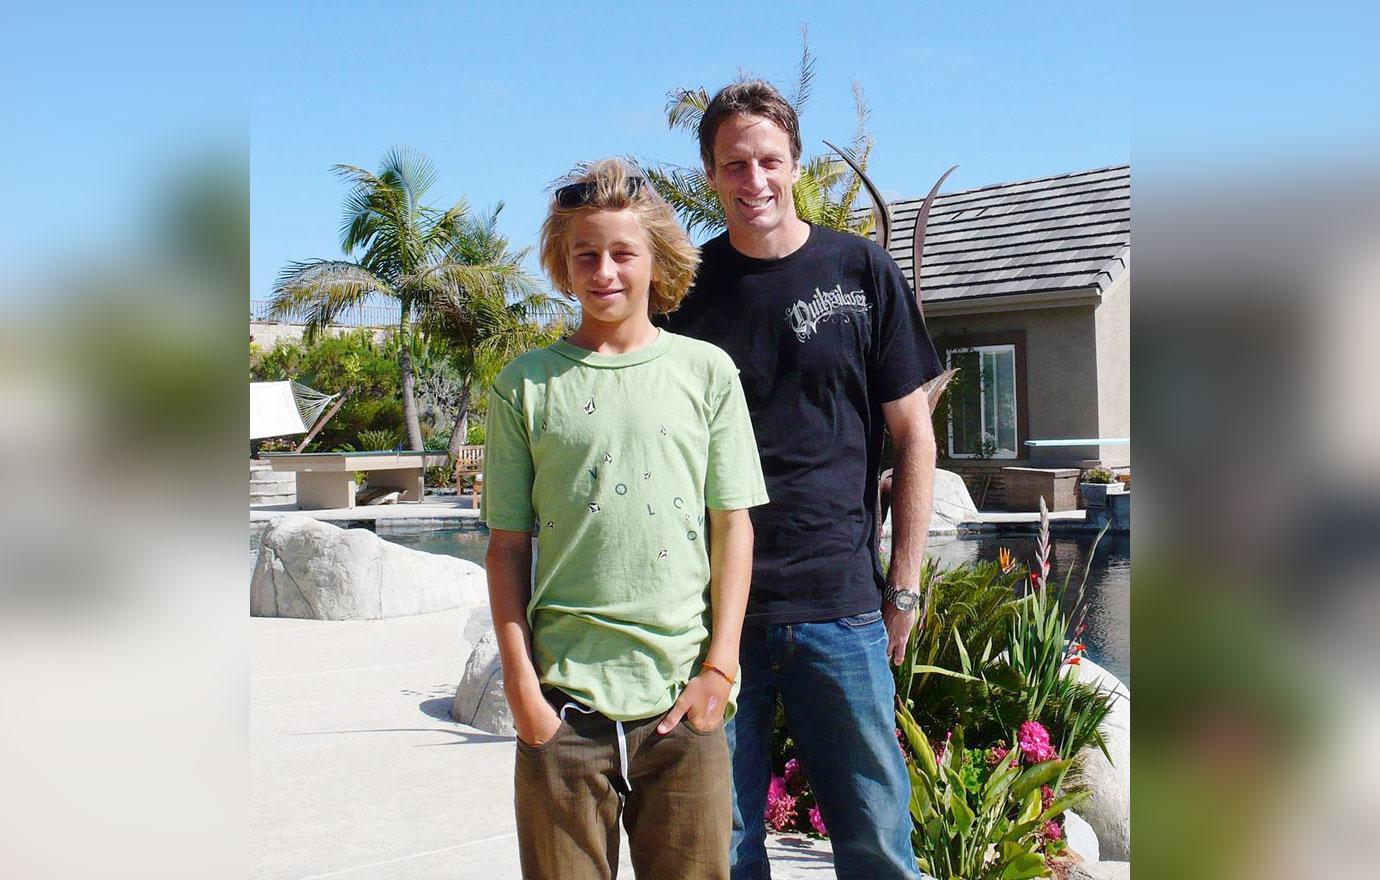 Hot Pictures of Tony Hawk's Son Riley